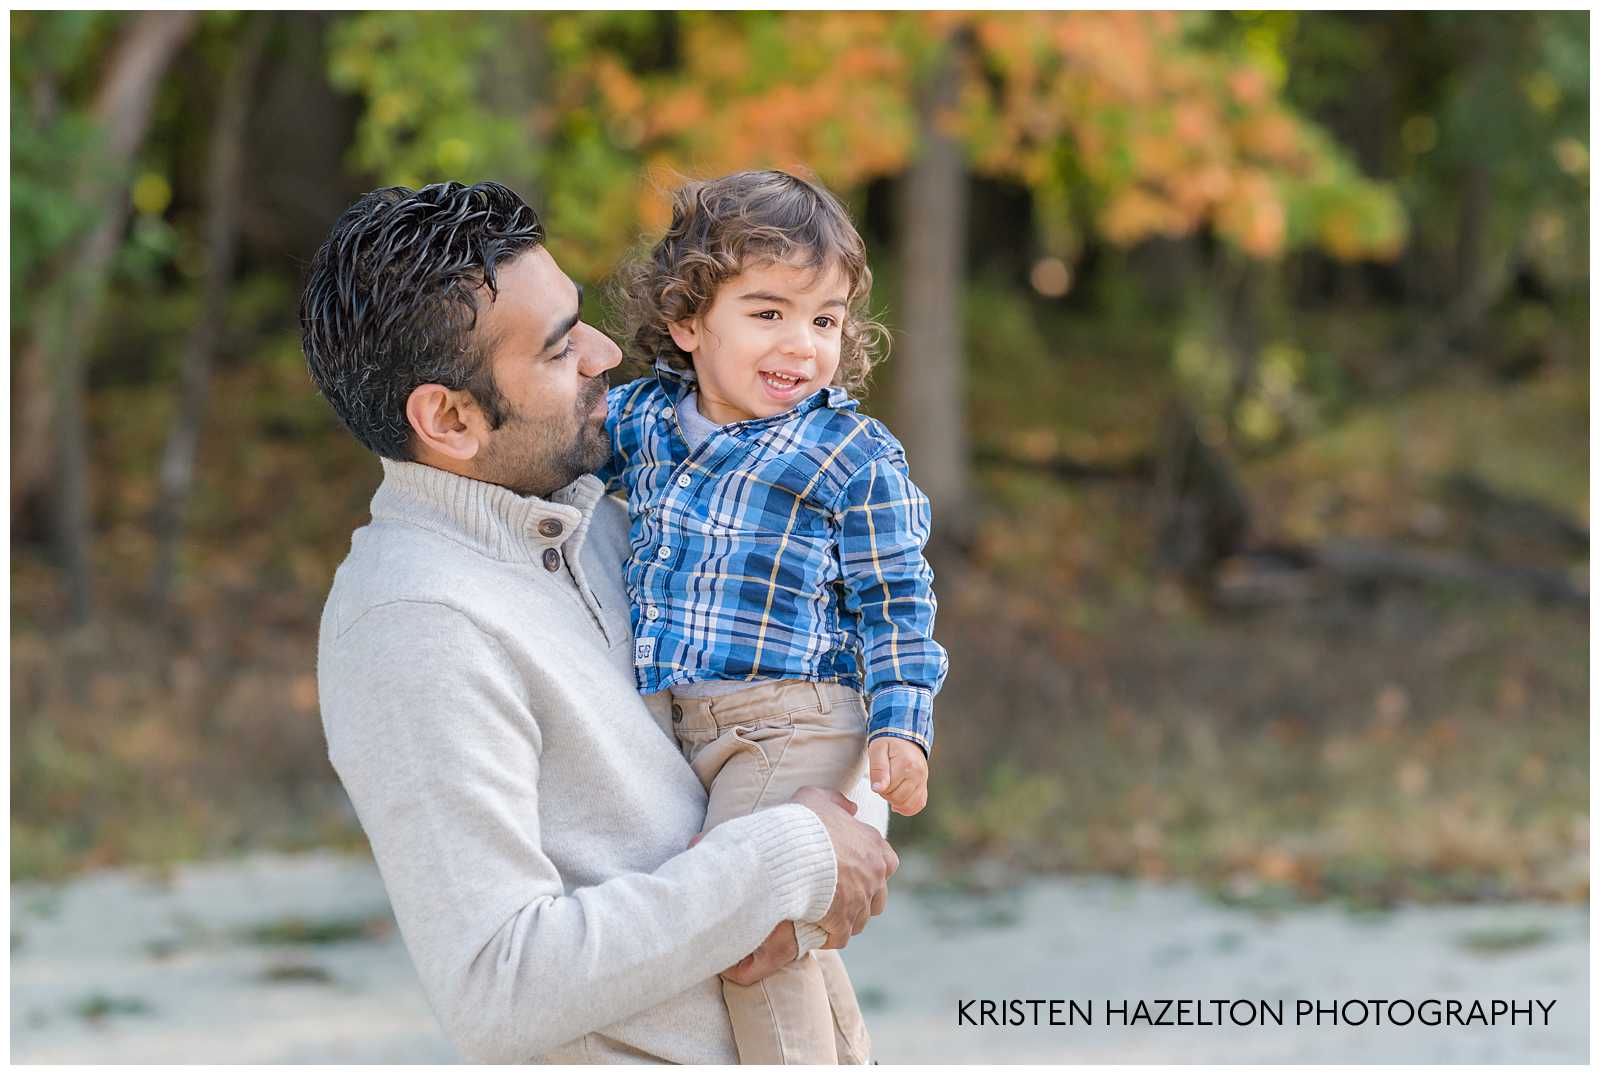 Dad holding his toddler son by River Forest, IL family photographer Kristen Hazelton